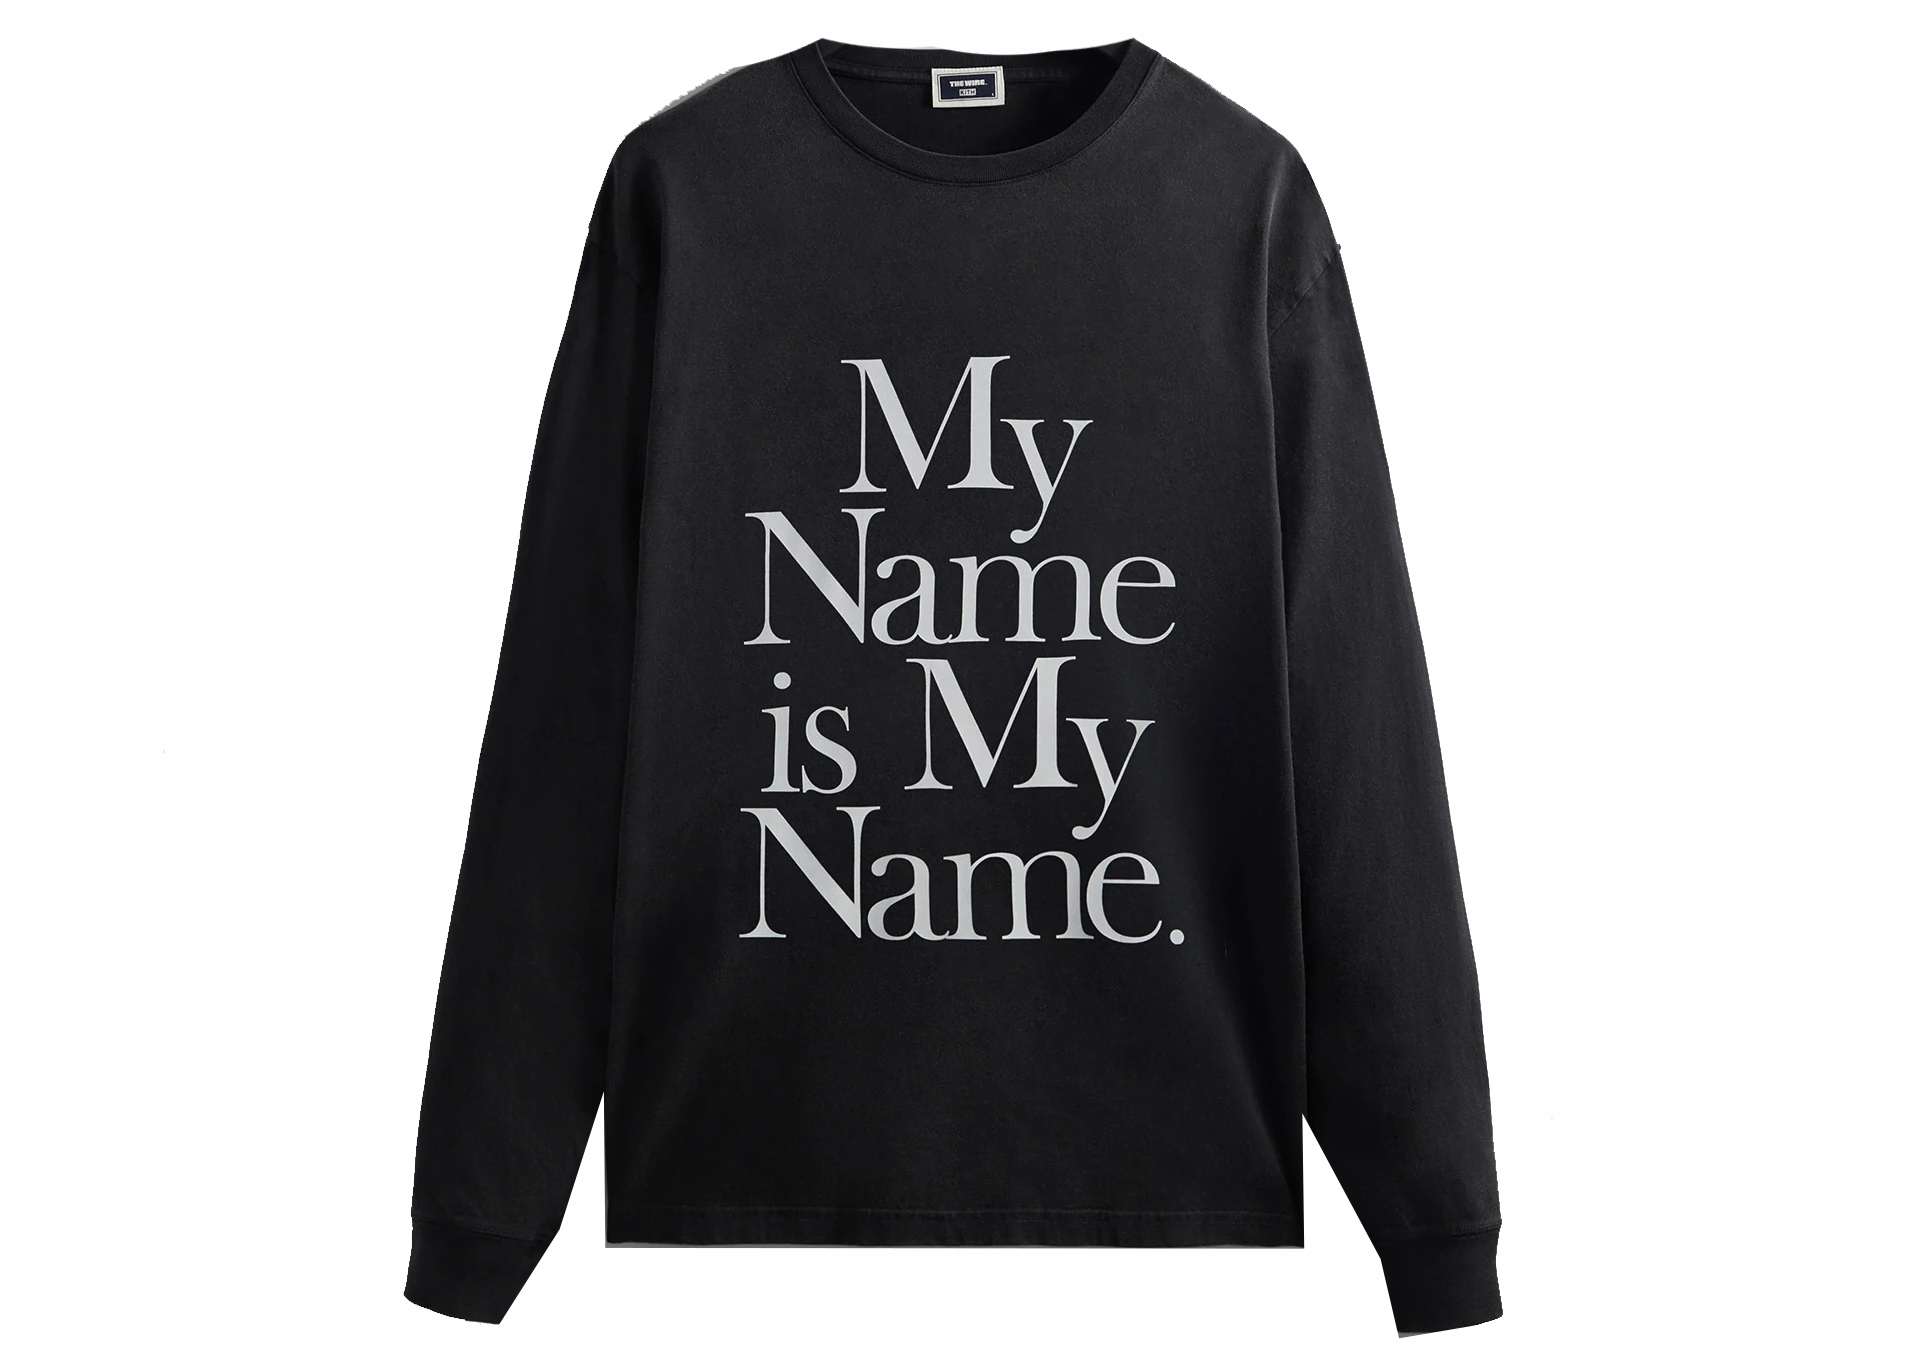 Kith　The　For　Black　Vintage　Is　Name　Wire　My　My　Name　L/S　Tee　M-